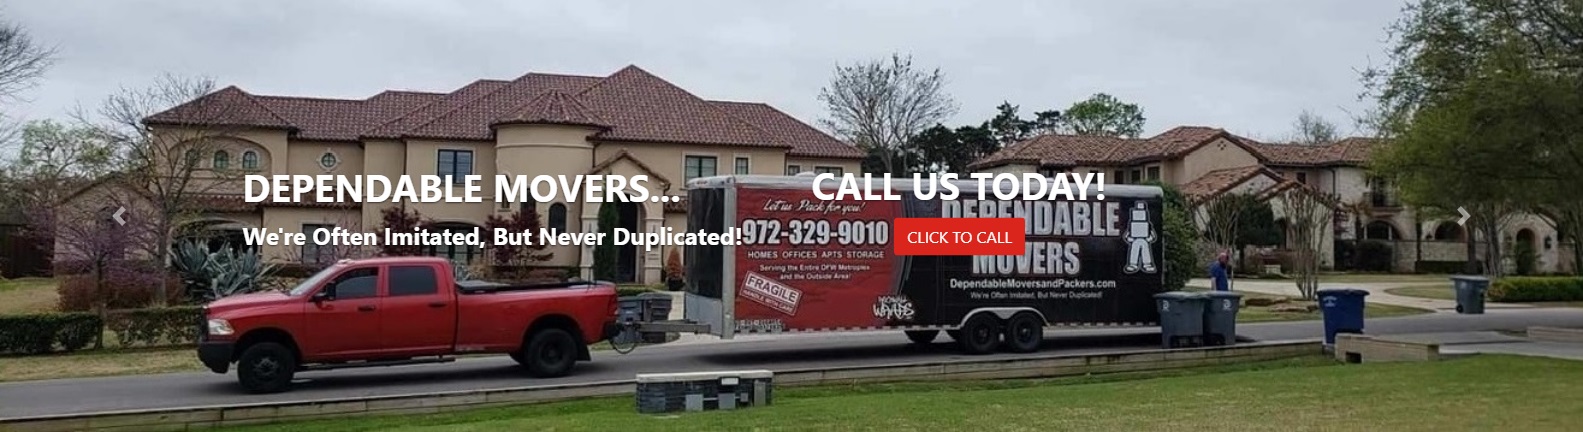 Dependable Movers in the Rowlett Texas area - Home Office Apartment Movers Residential Commercial Movers in the Rowlett Texas area